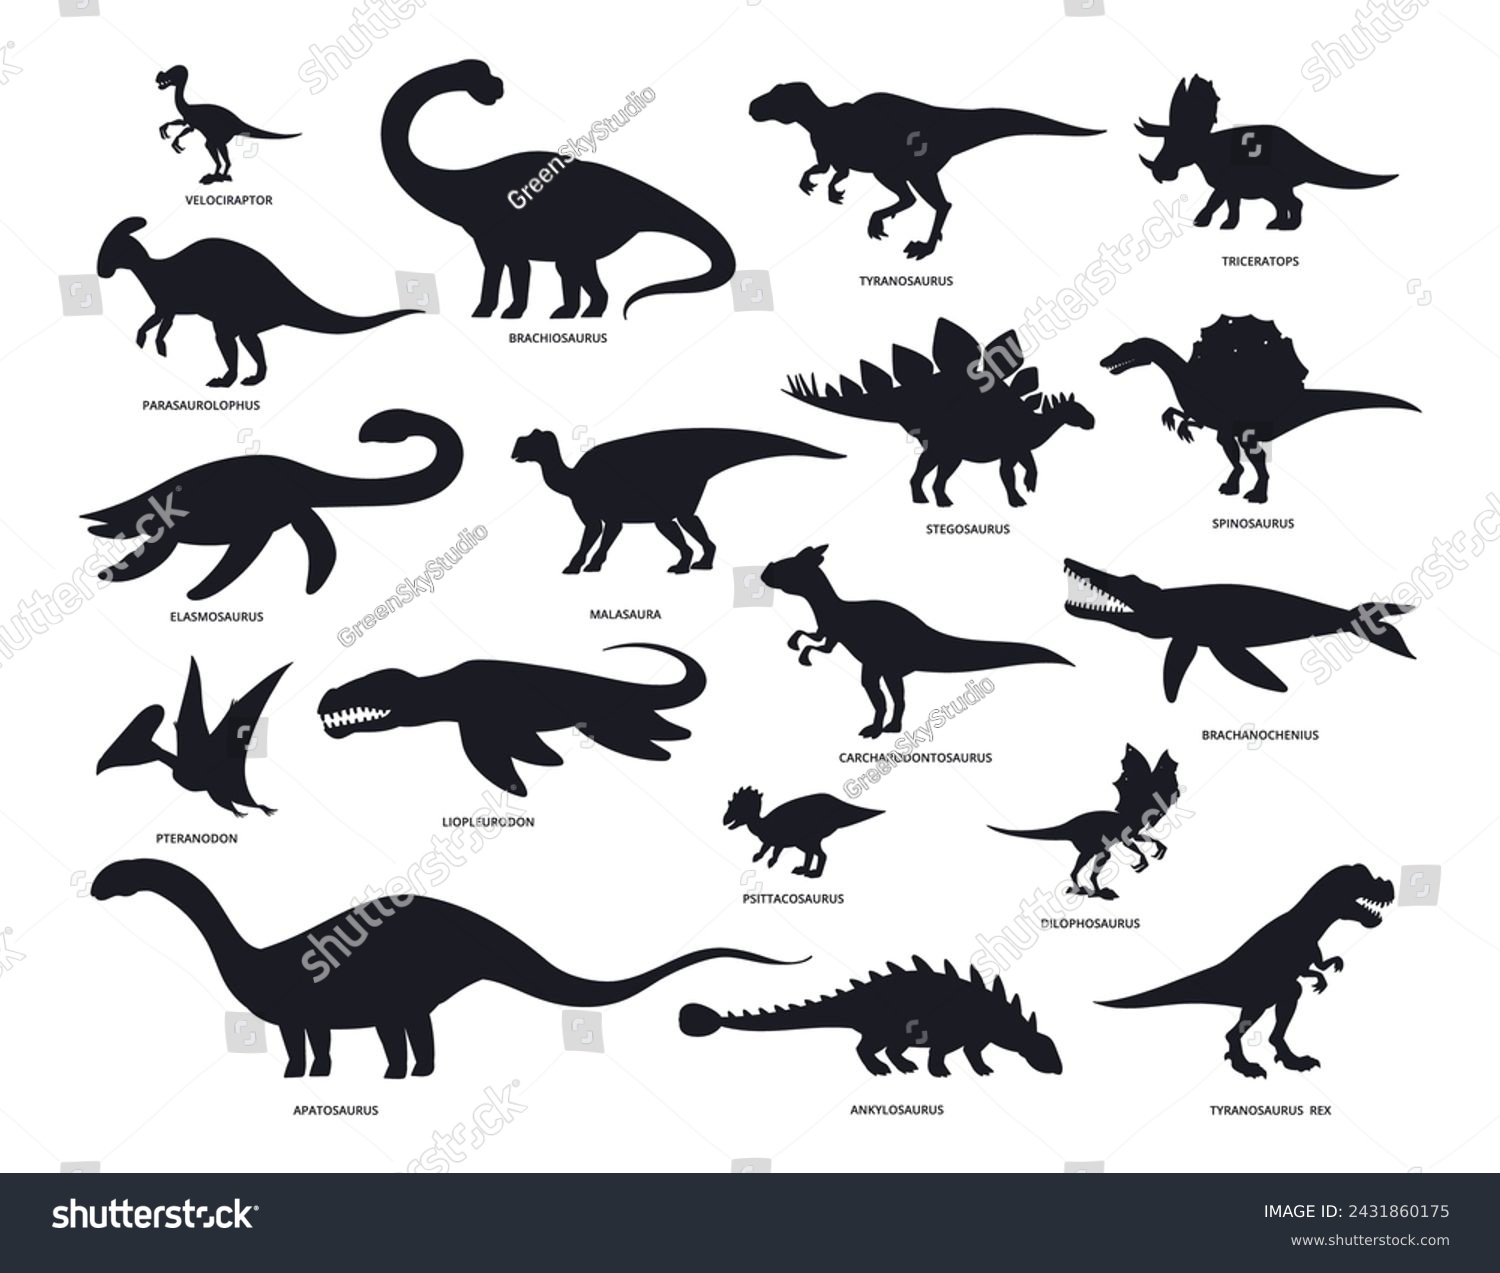 SVG of Dinosaurs silhouettes. Ancient Jurassic reptiles, black ink stegosaurus, brontosaurus and pterodactyl silhouettes flat vector illustration set. Dino monsters silhouette collection svg